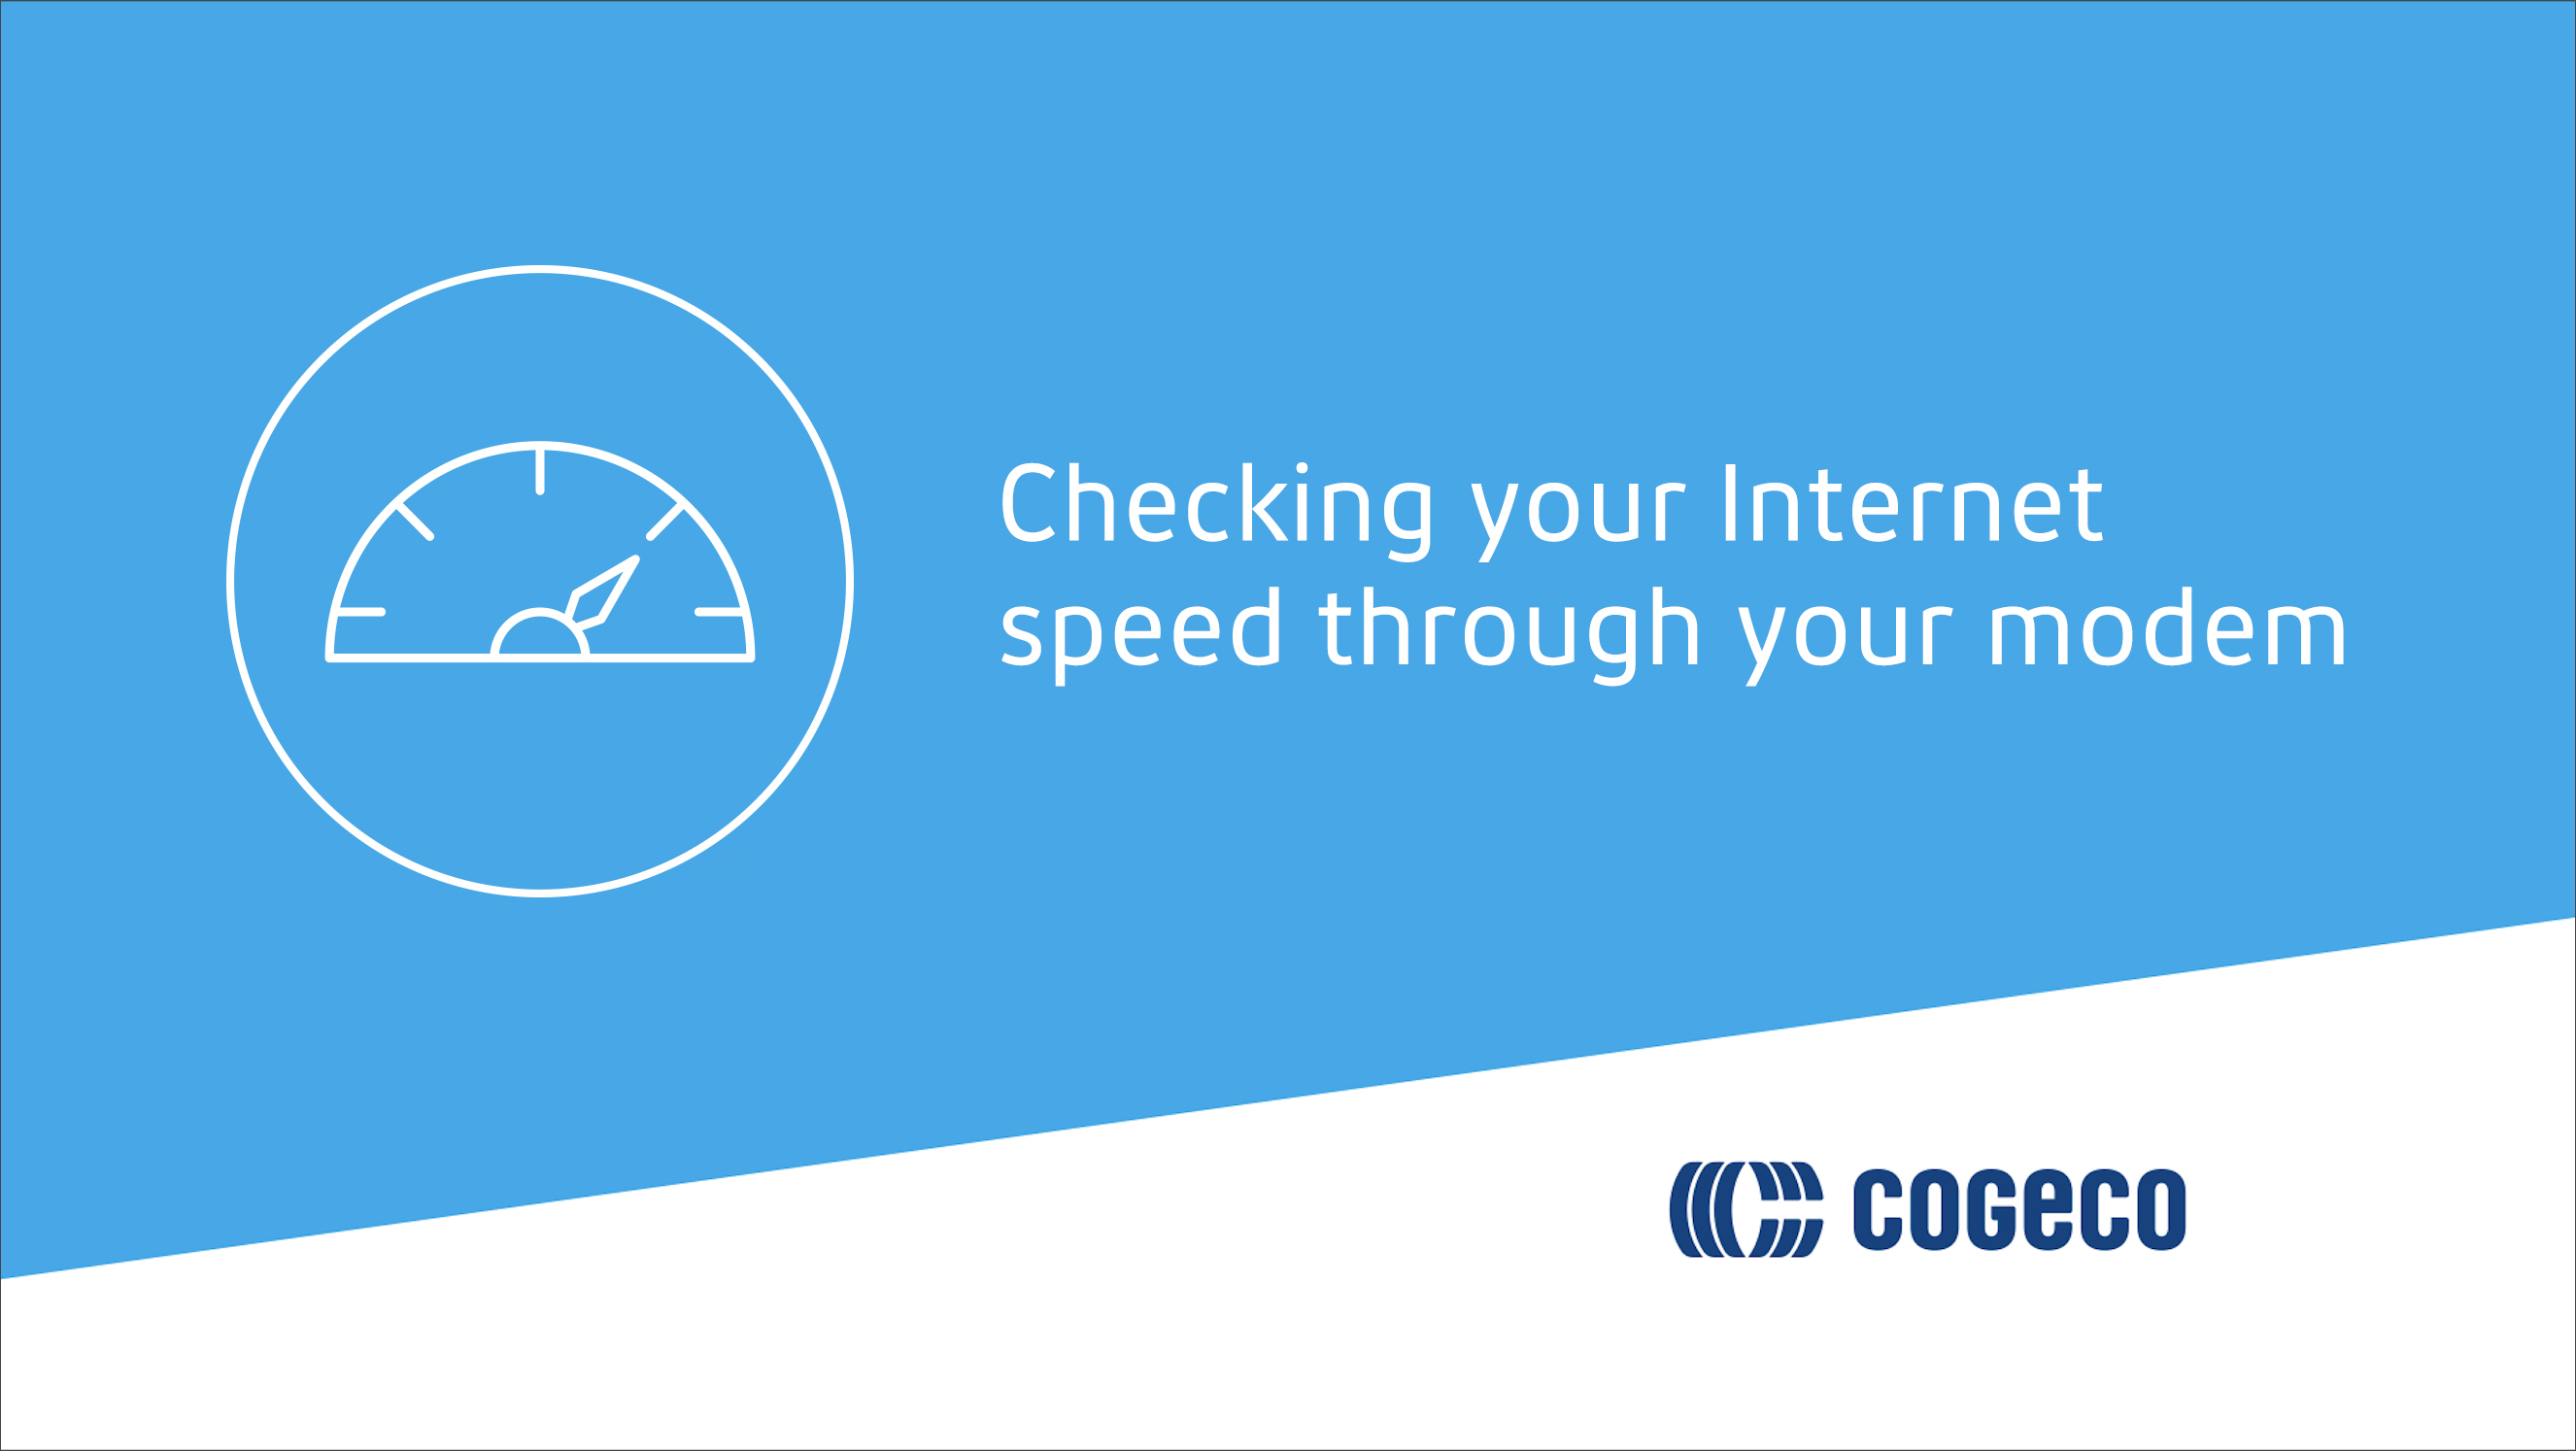 Checking your internet speed through your modem